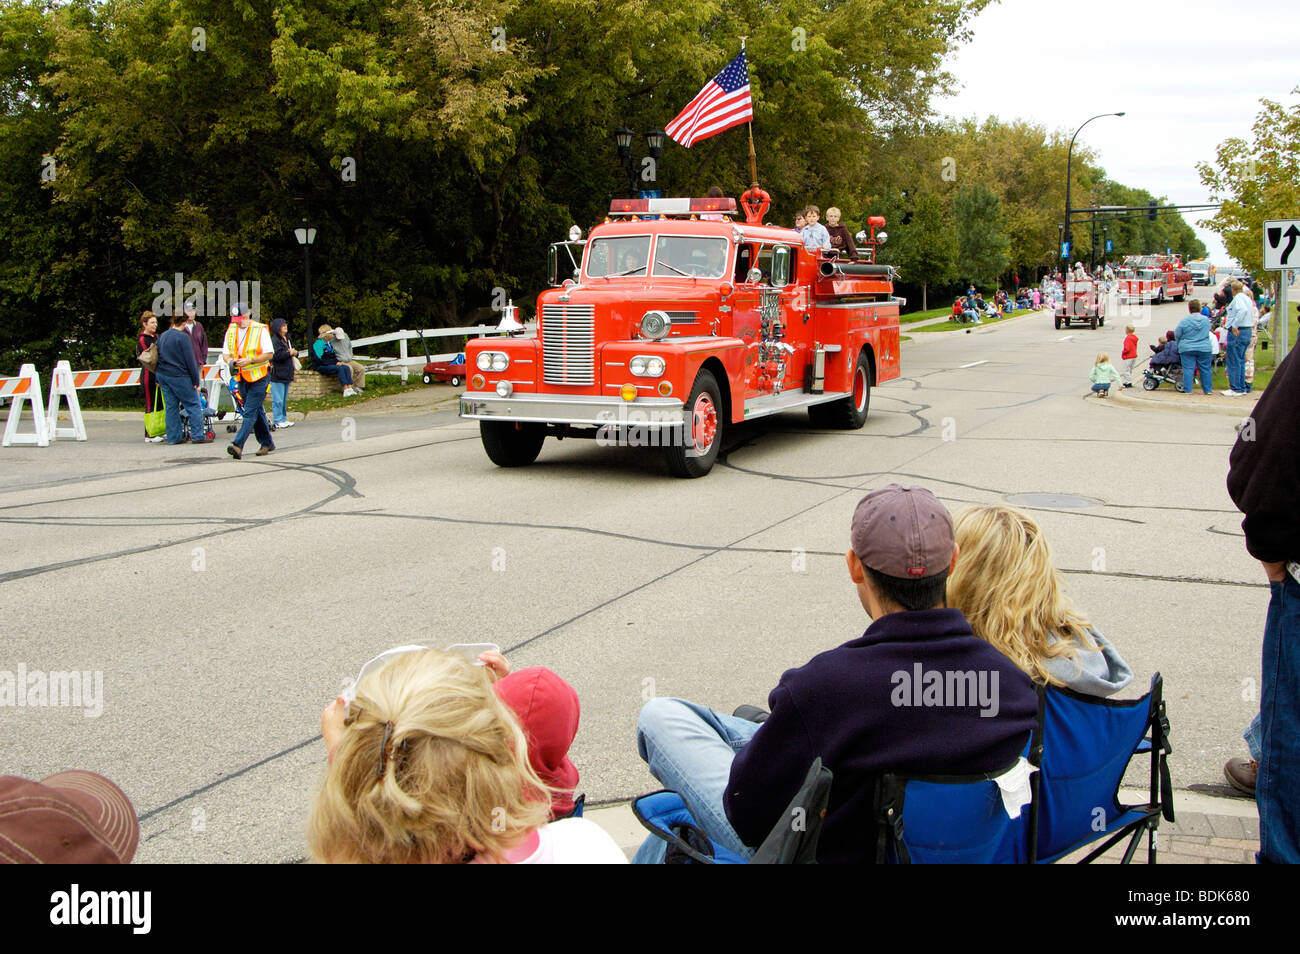 Fire and rescue vehicles being driven in a fire muster parade Stock